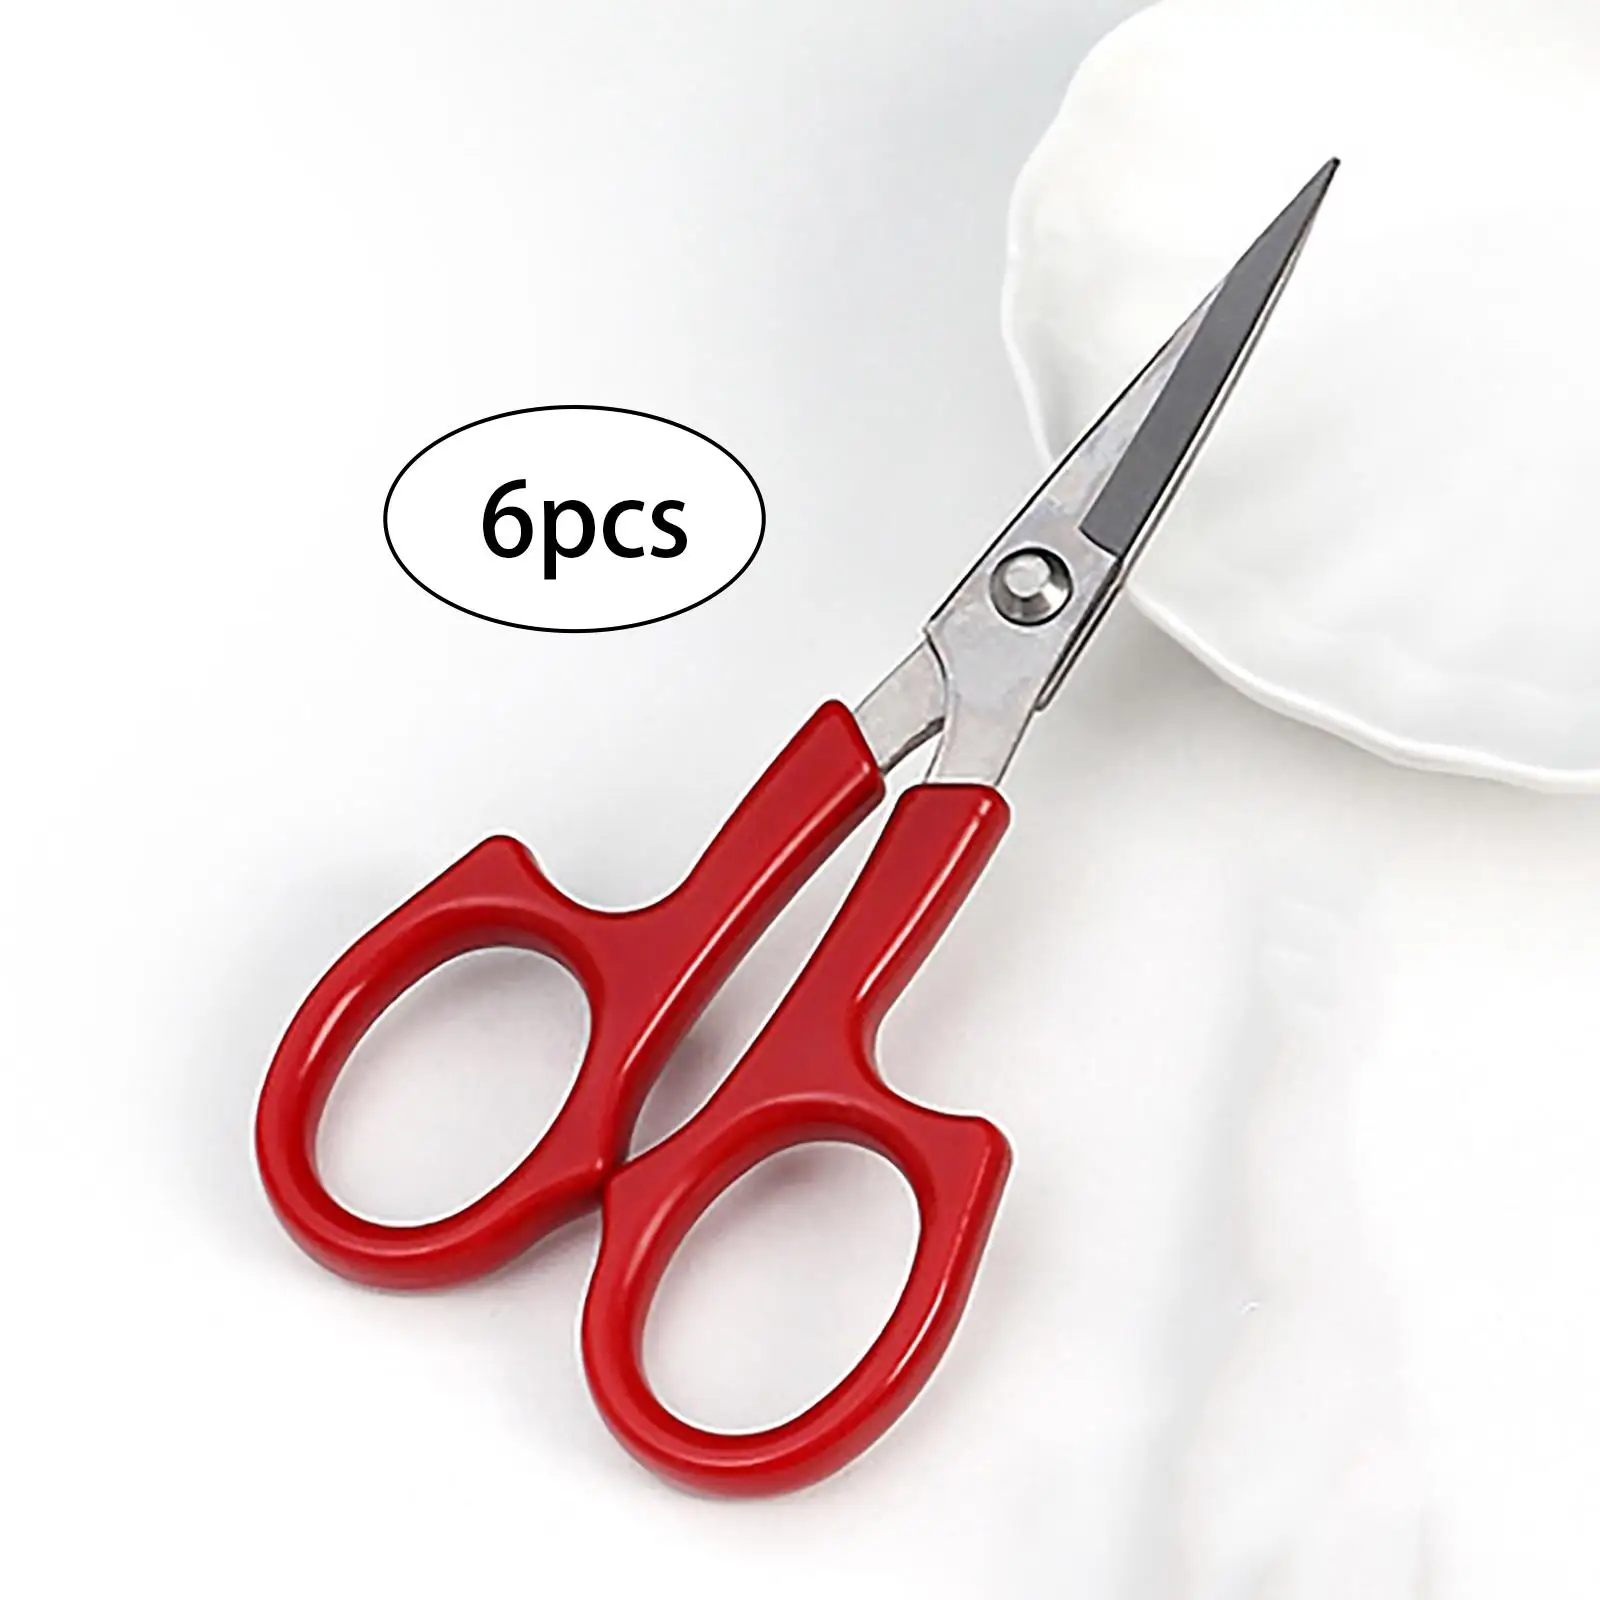 6 Pieces Embroidery Scissors Curved Tip Stainless Steel Blade for Handicraft